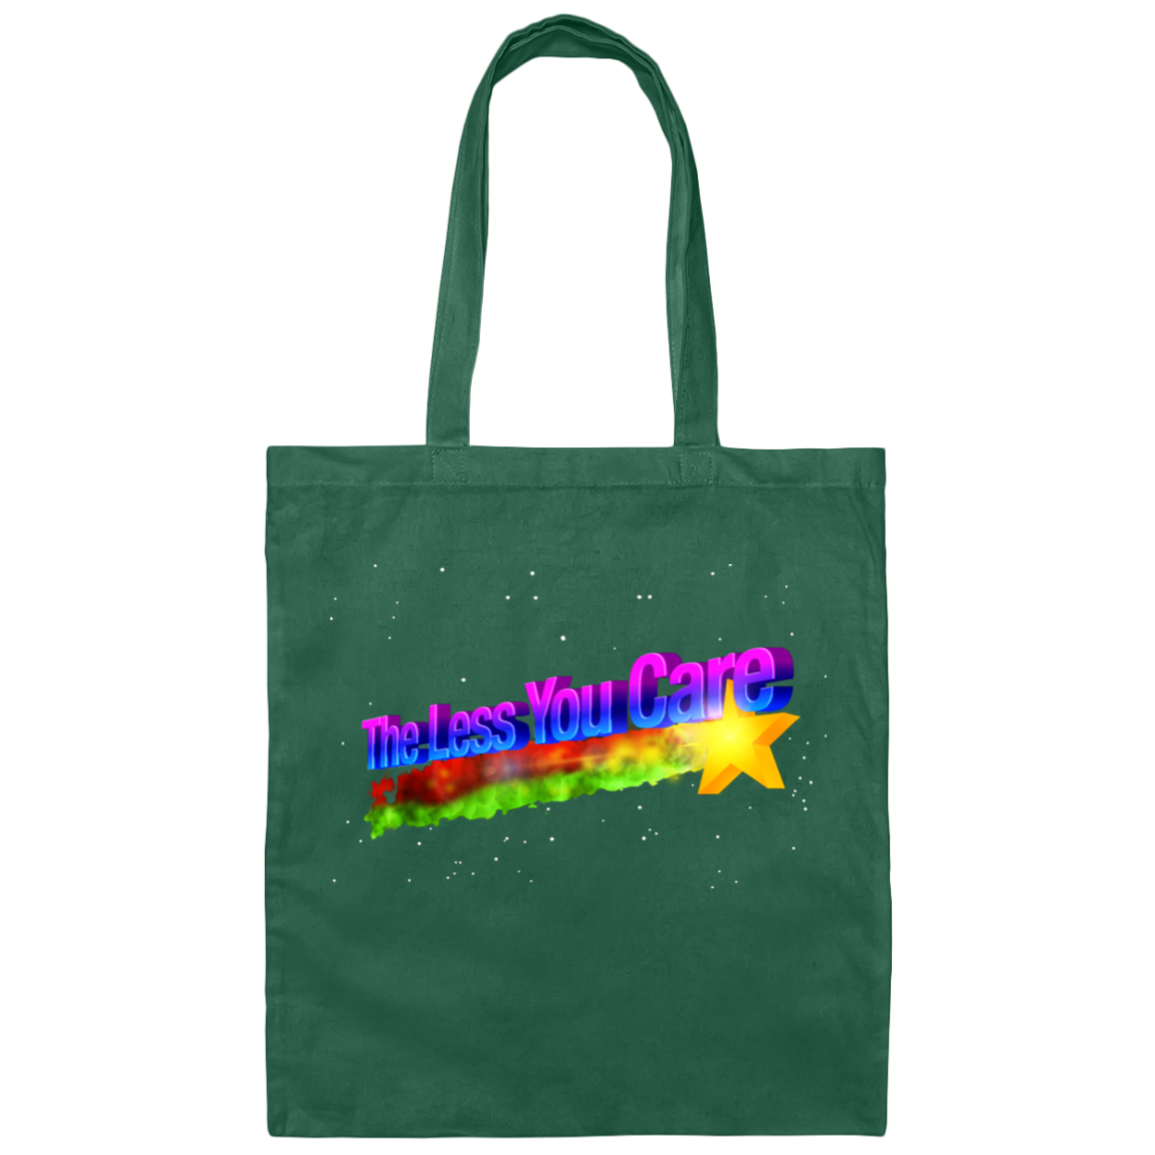 The Less You Care Canvas Tote Bag